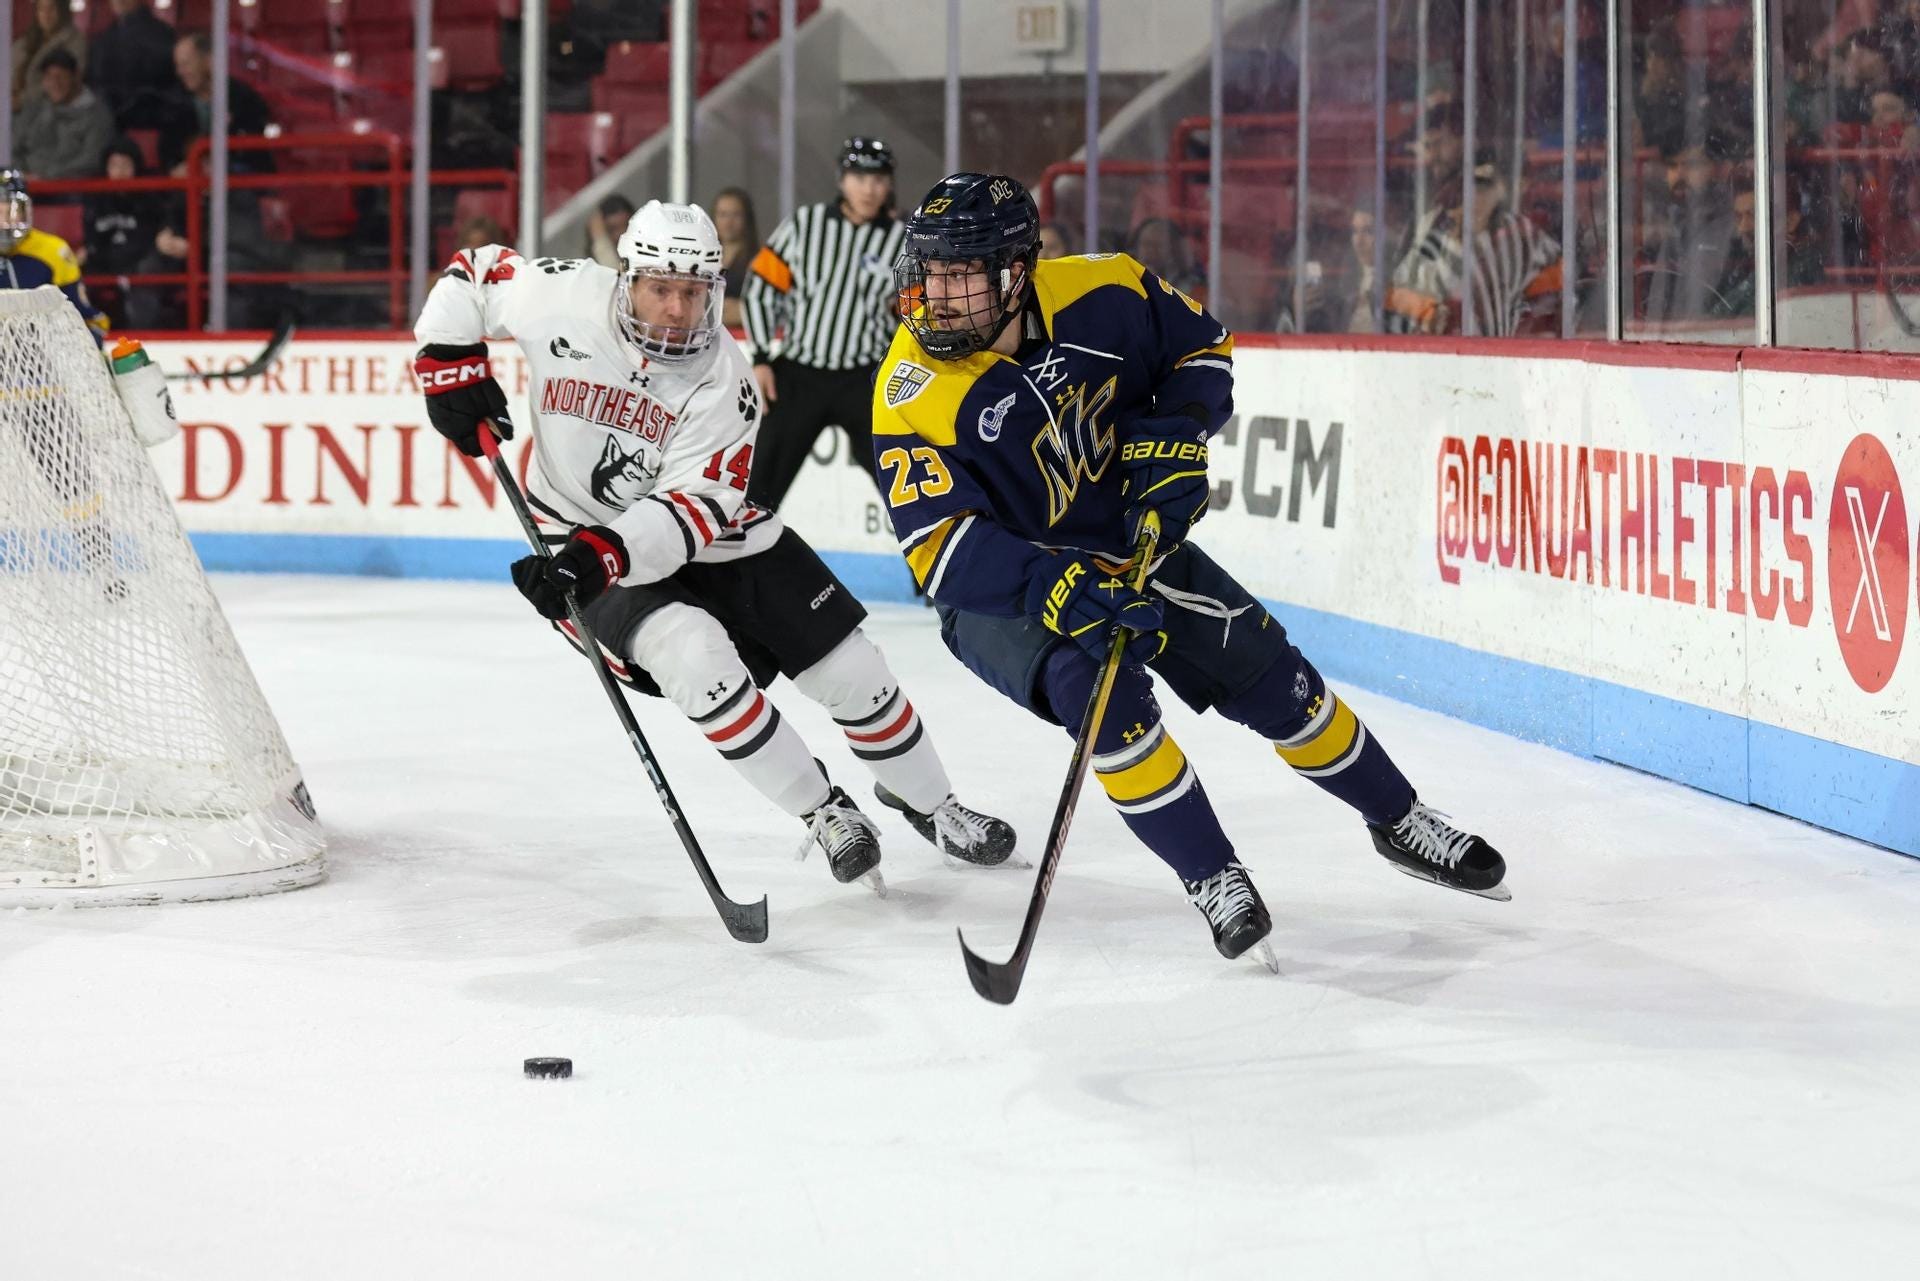 Second period woes doom Merrimack in 5-3 loss at Northeastern